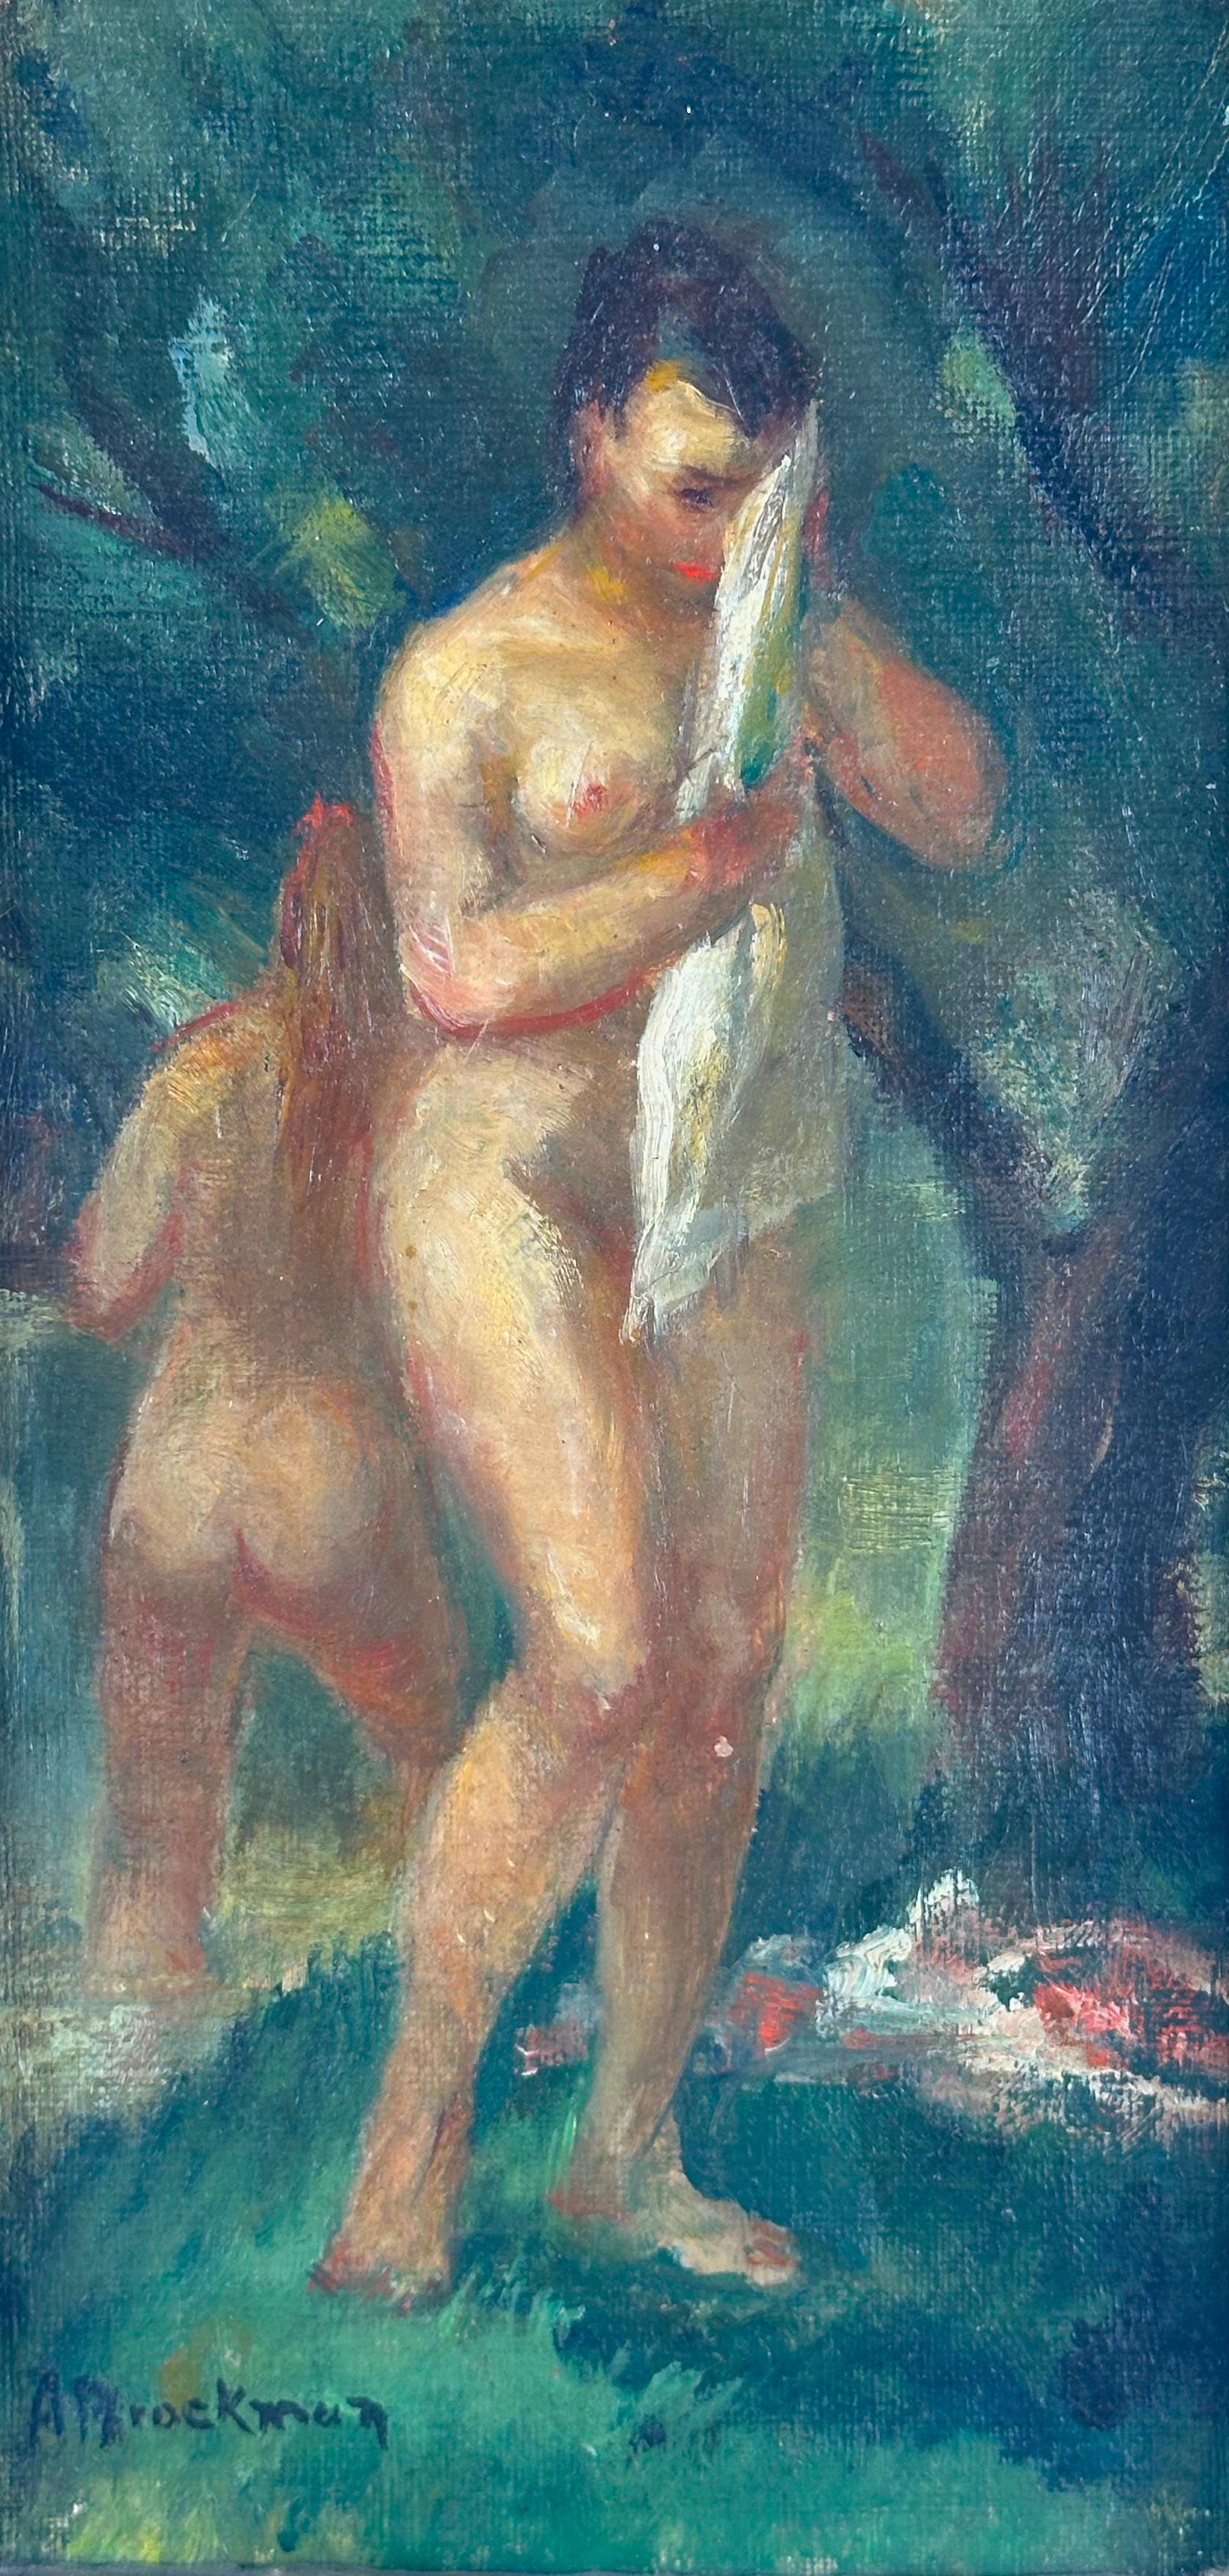 Female Bather (Nude Women) - Painting by Ann Brockman